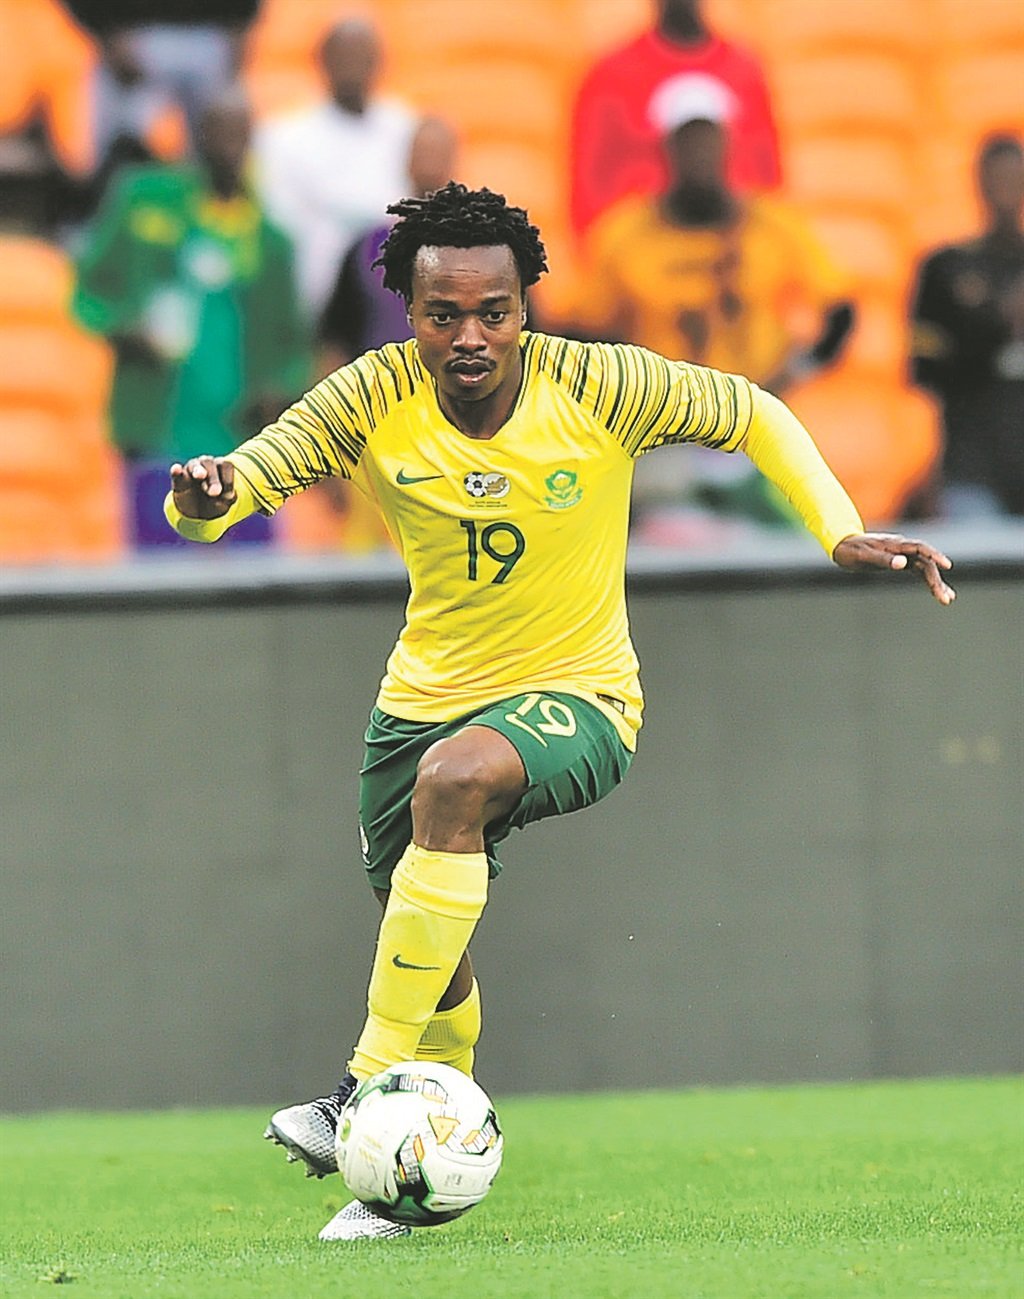 This year could not have started better for Tau who will now realise his dream of playing in the EPL. But now our star player must live up to the hype and take the league by storm. Picture: Themba Makofane